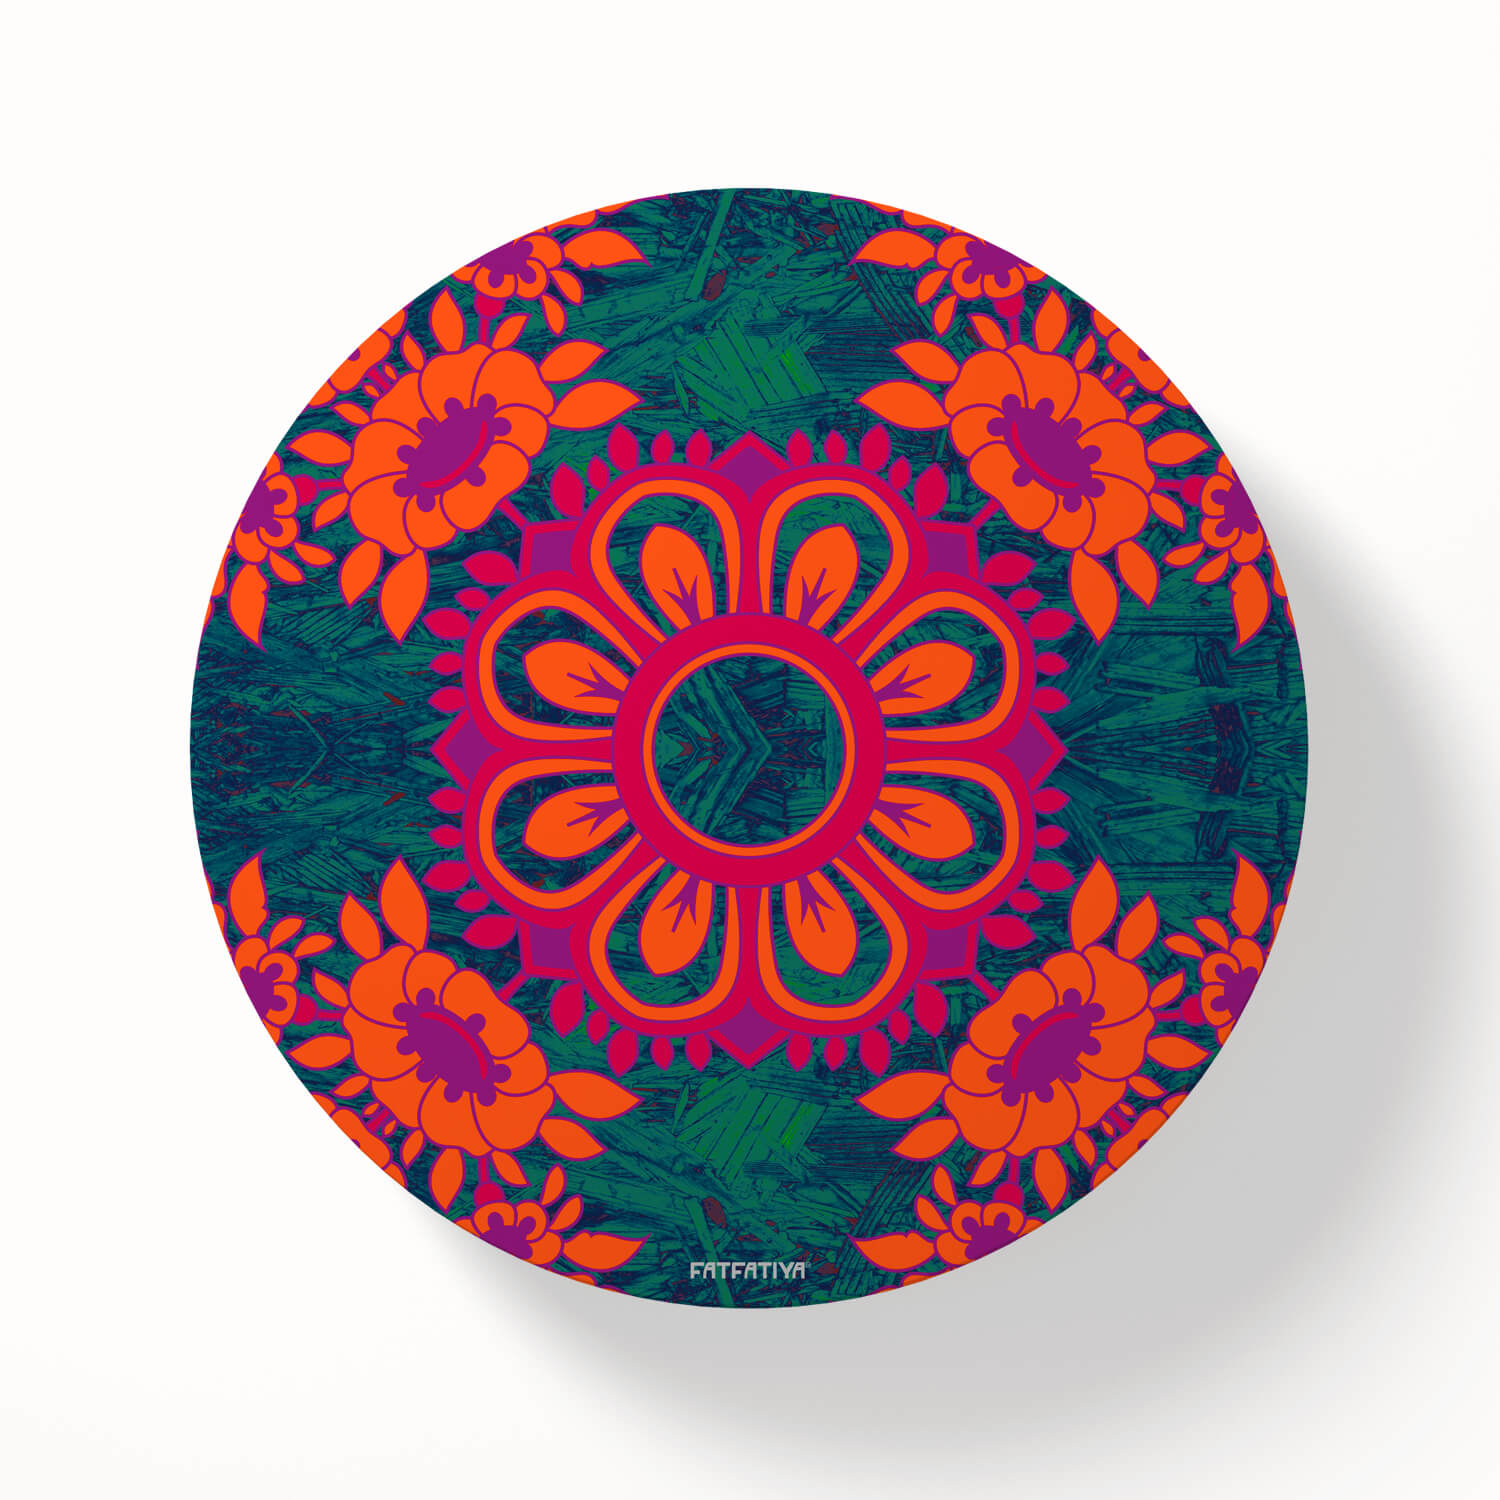 Magnificent Flower Motif Set of 6 Printed Round Coasters